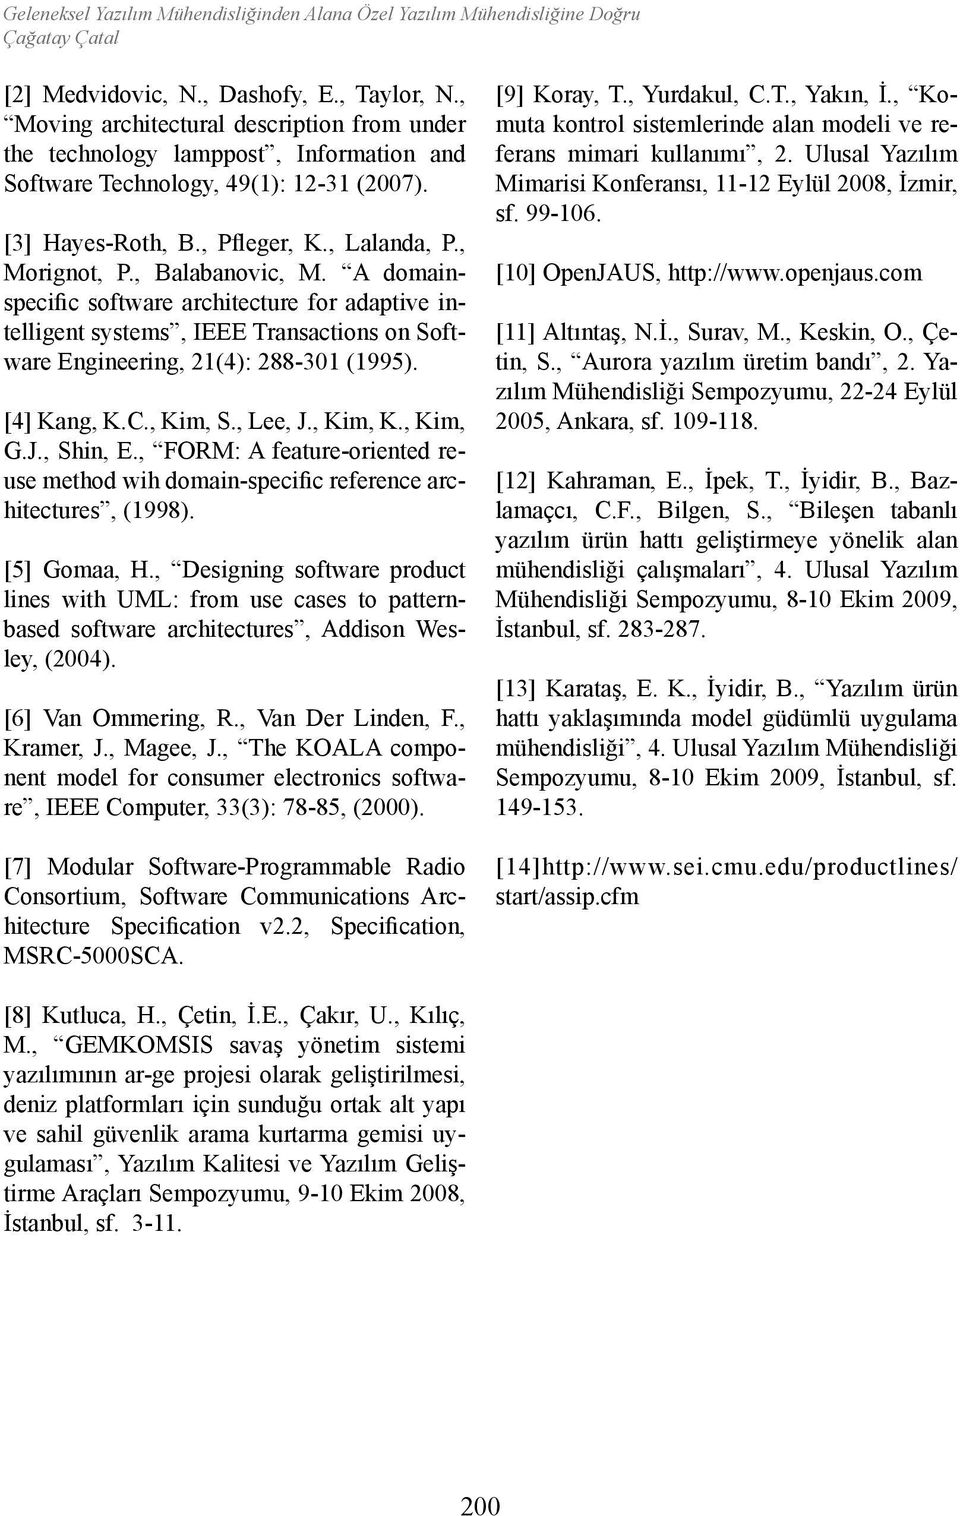 , Balabanovic, M. A domainspecific software architecture for adaptive intelligent systems, IEEE Transactions on Software Engineering, 21(4): 288-301 (1995). [4] Kang, K.C., Kim, S., Lee, J., Kim, K.